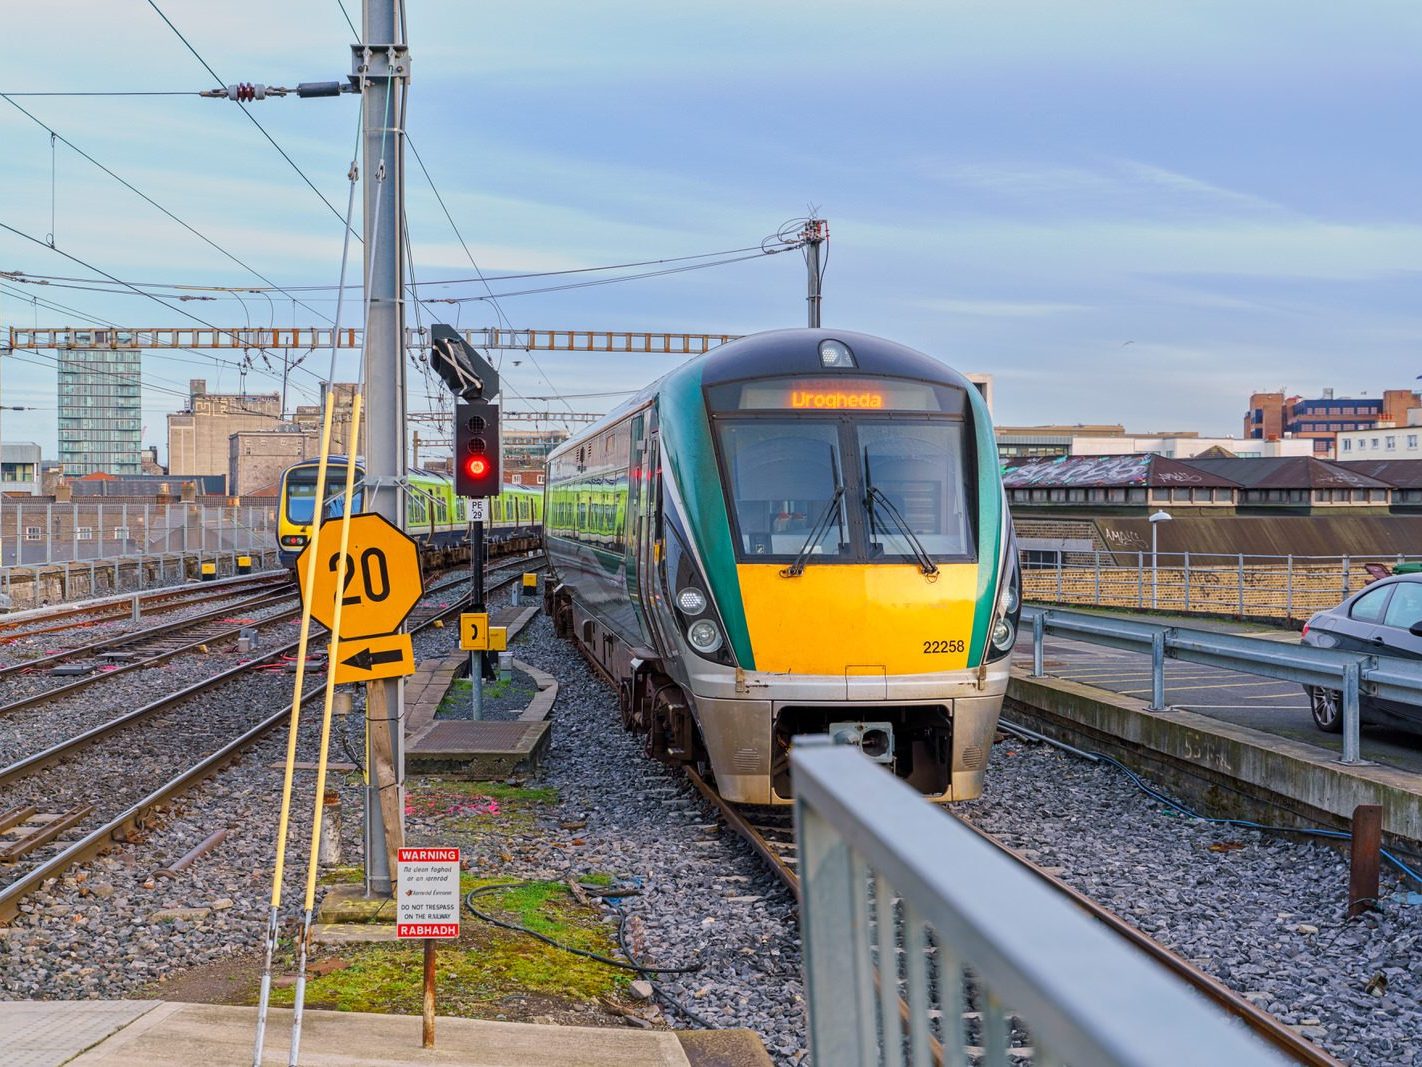 PEARSE STATION AS IT WAS [FEBRUARY 2016]-233974-1